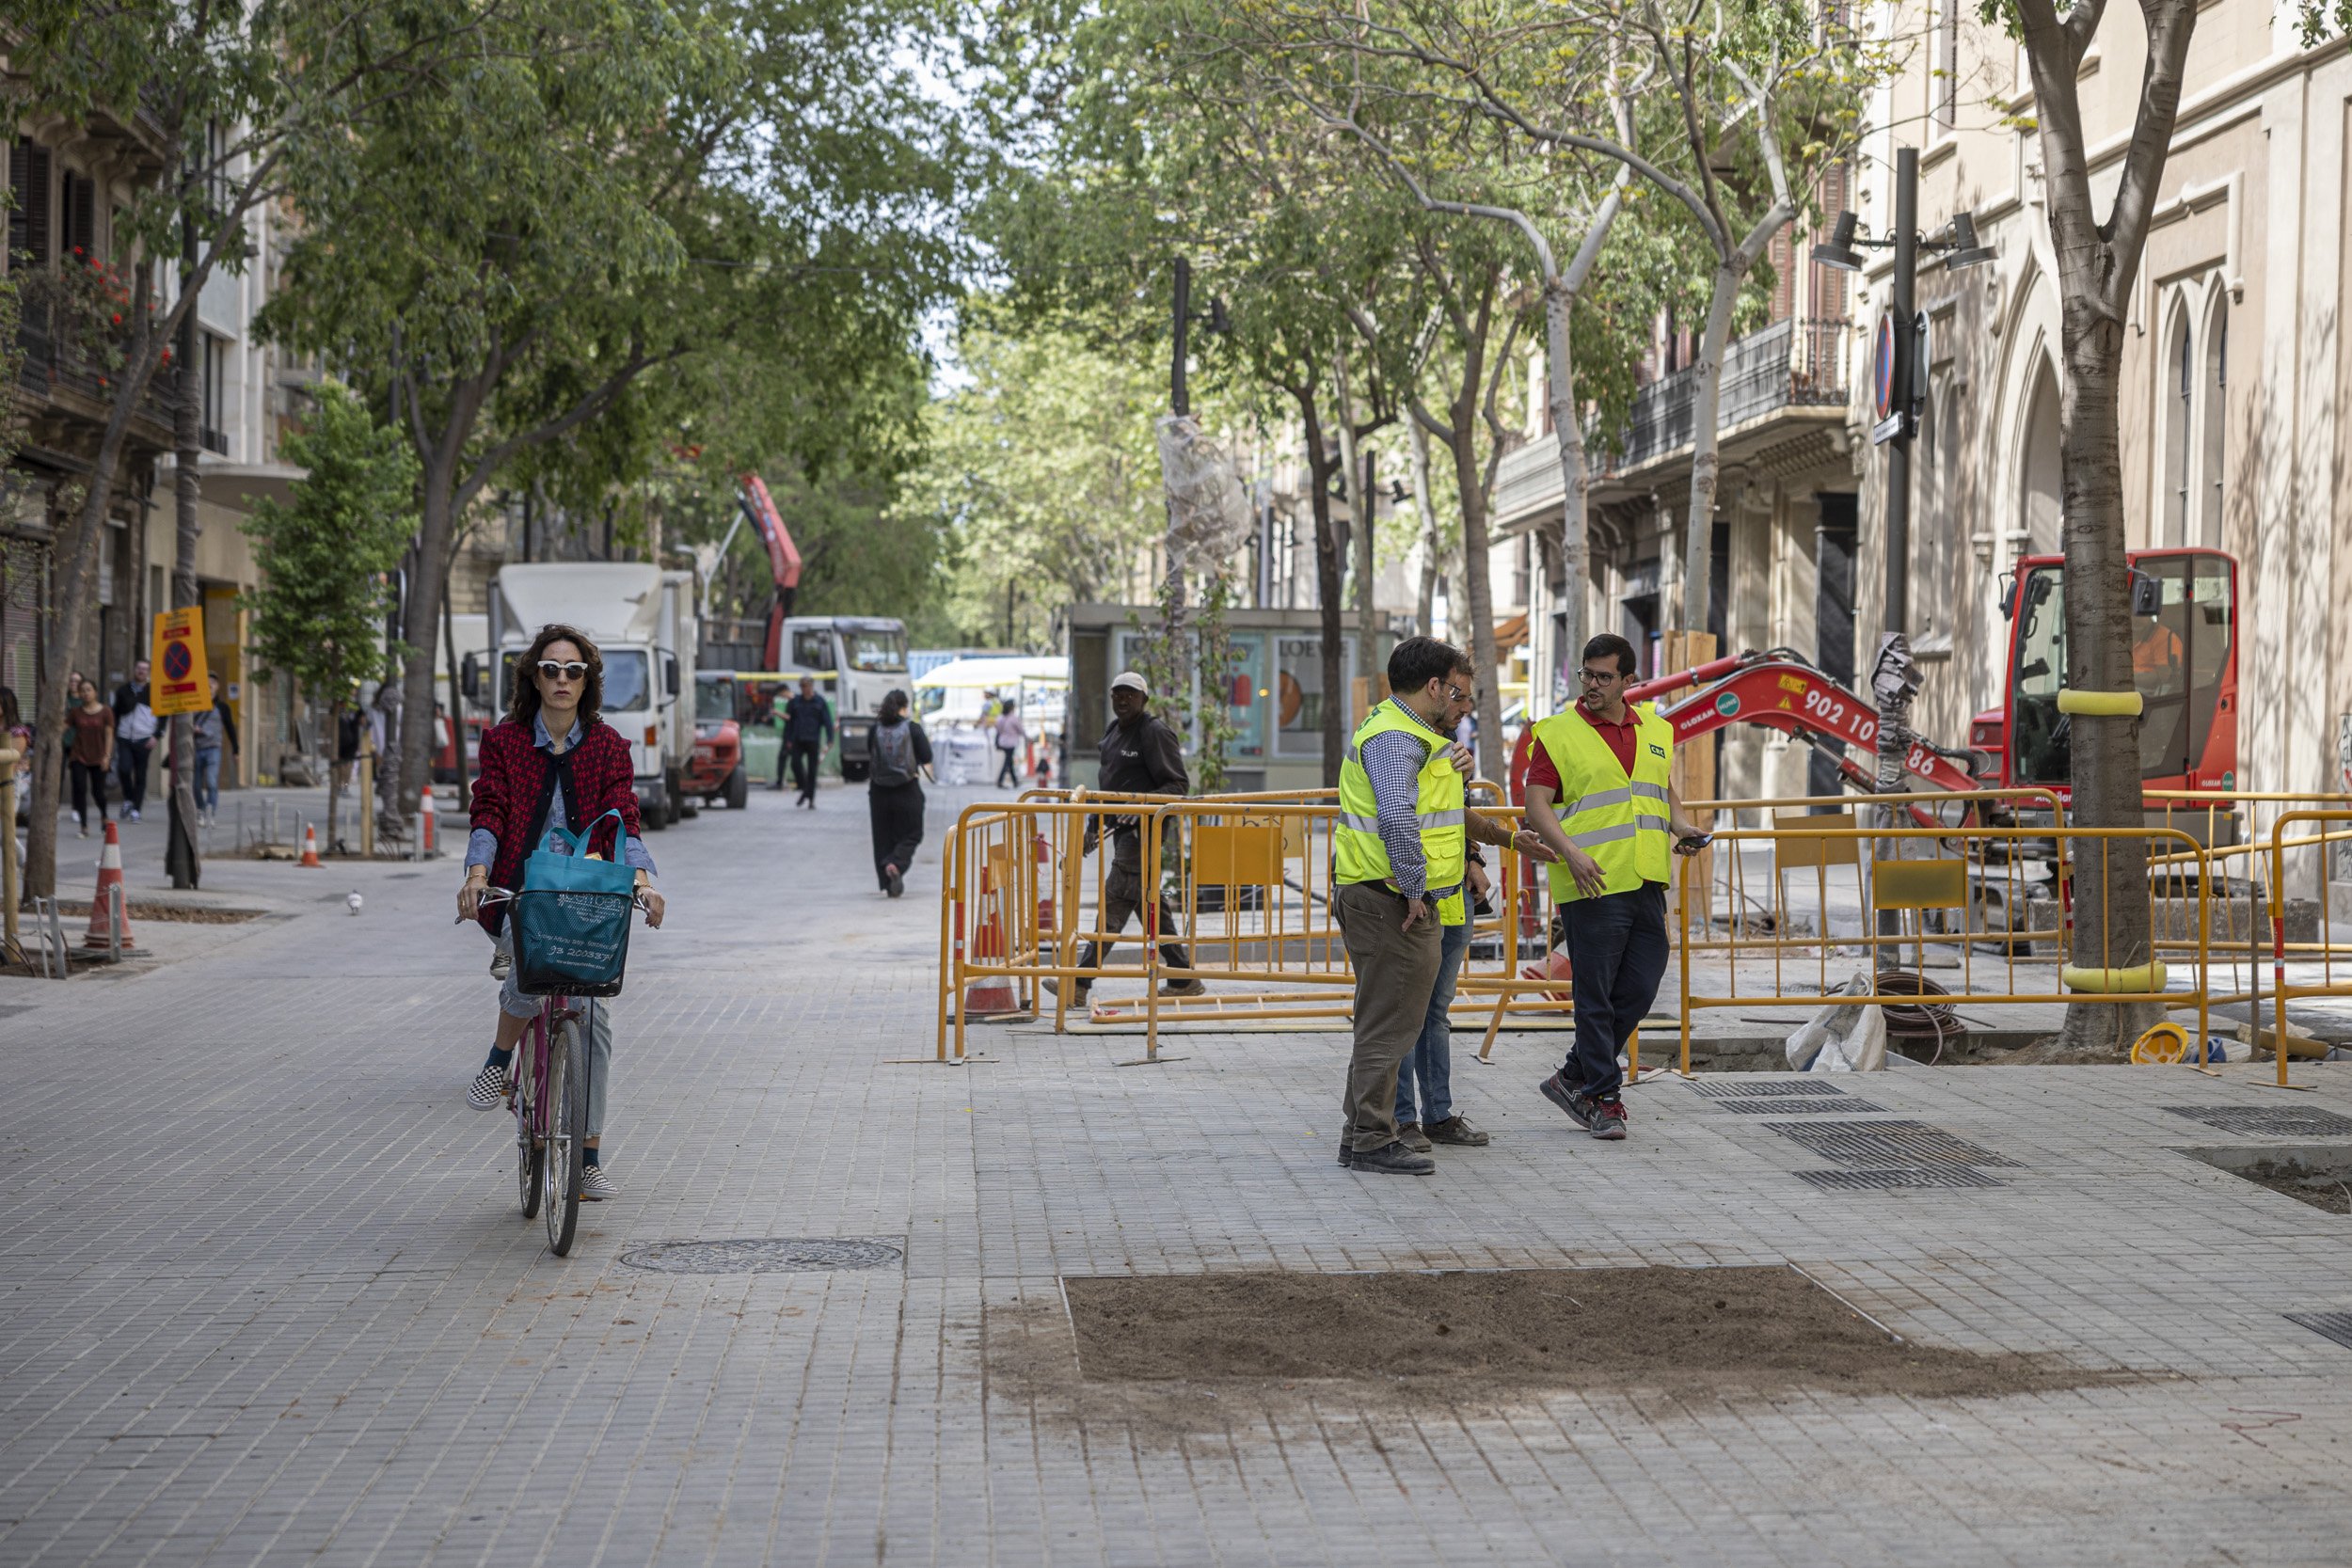 Barcelona court rules against city's pedestrianized 'superblock', ordering a return to traffic lanes